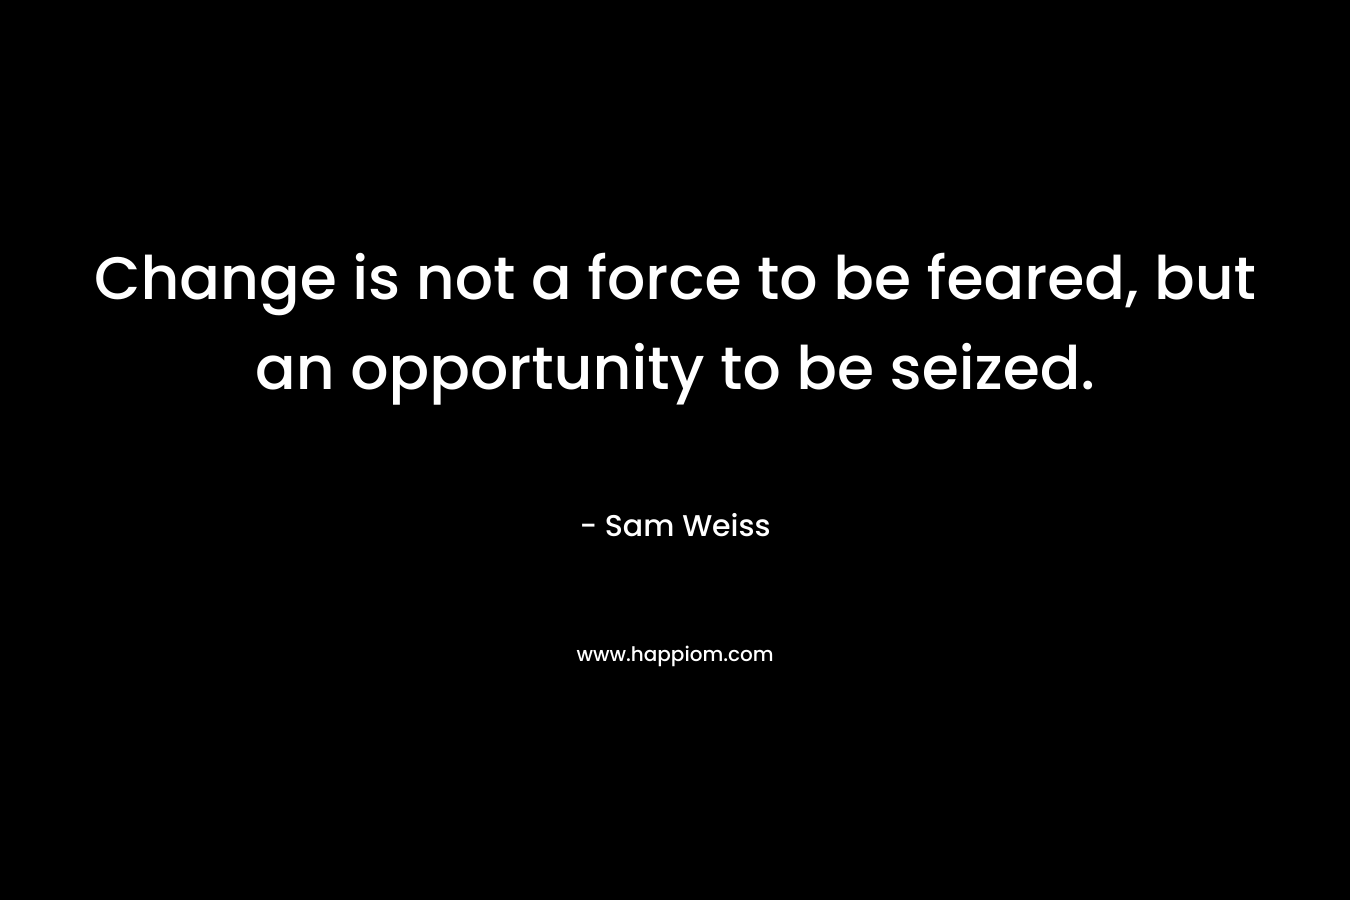 Change is not a force to be feared, but an opportunity to be seized. – Sam Weiss